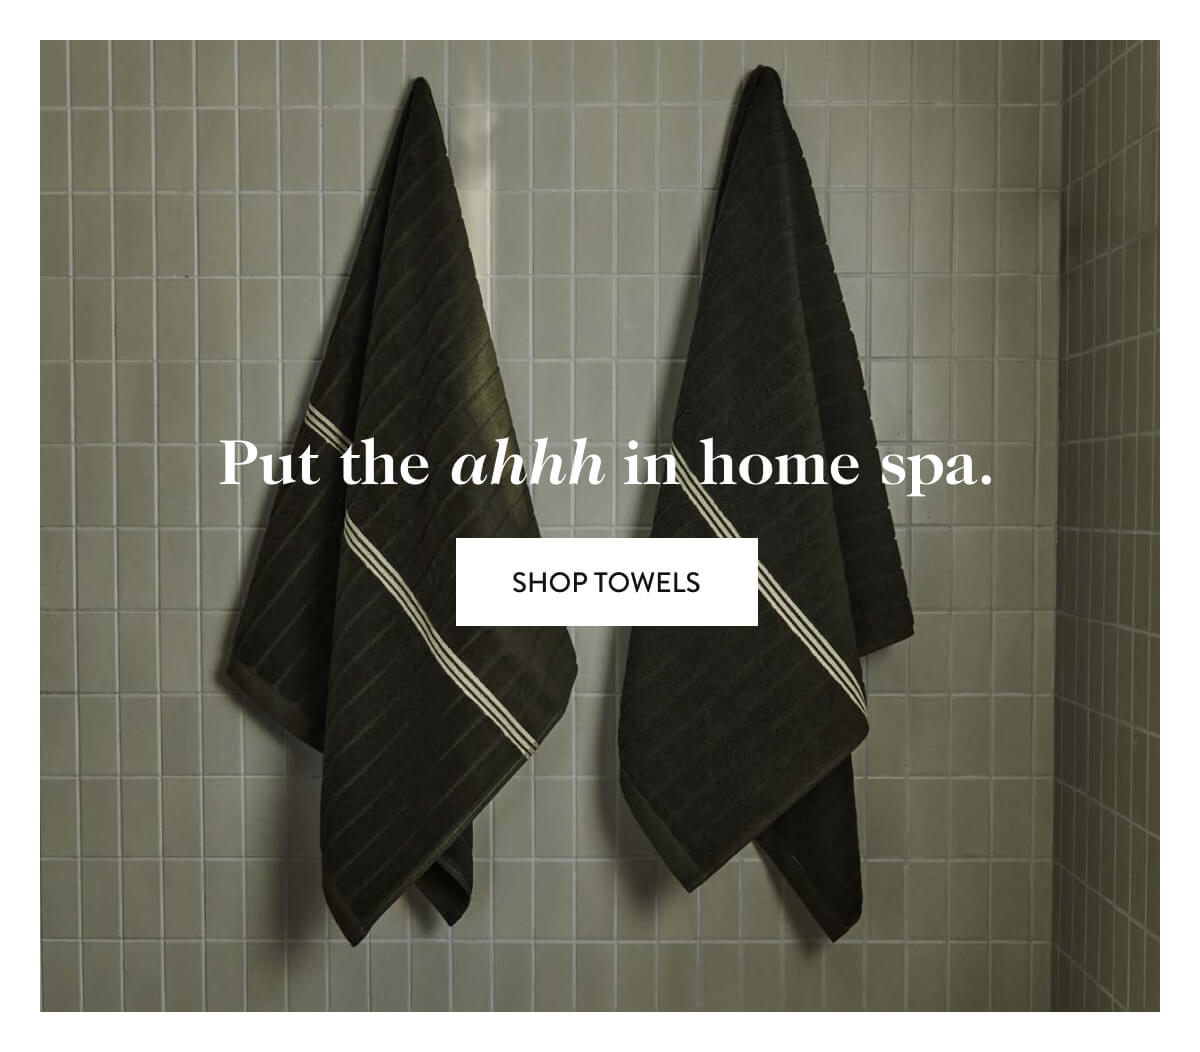 Put the ahhh in home spa.